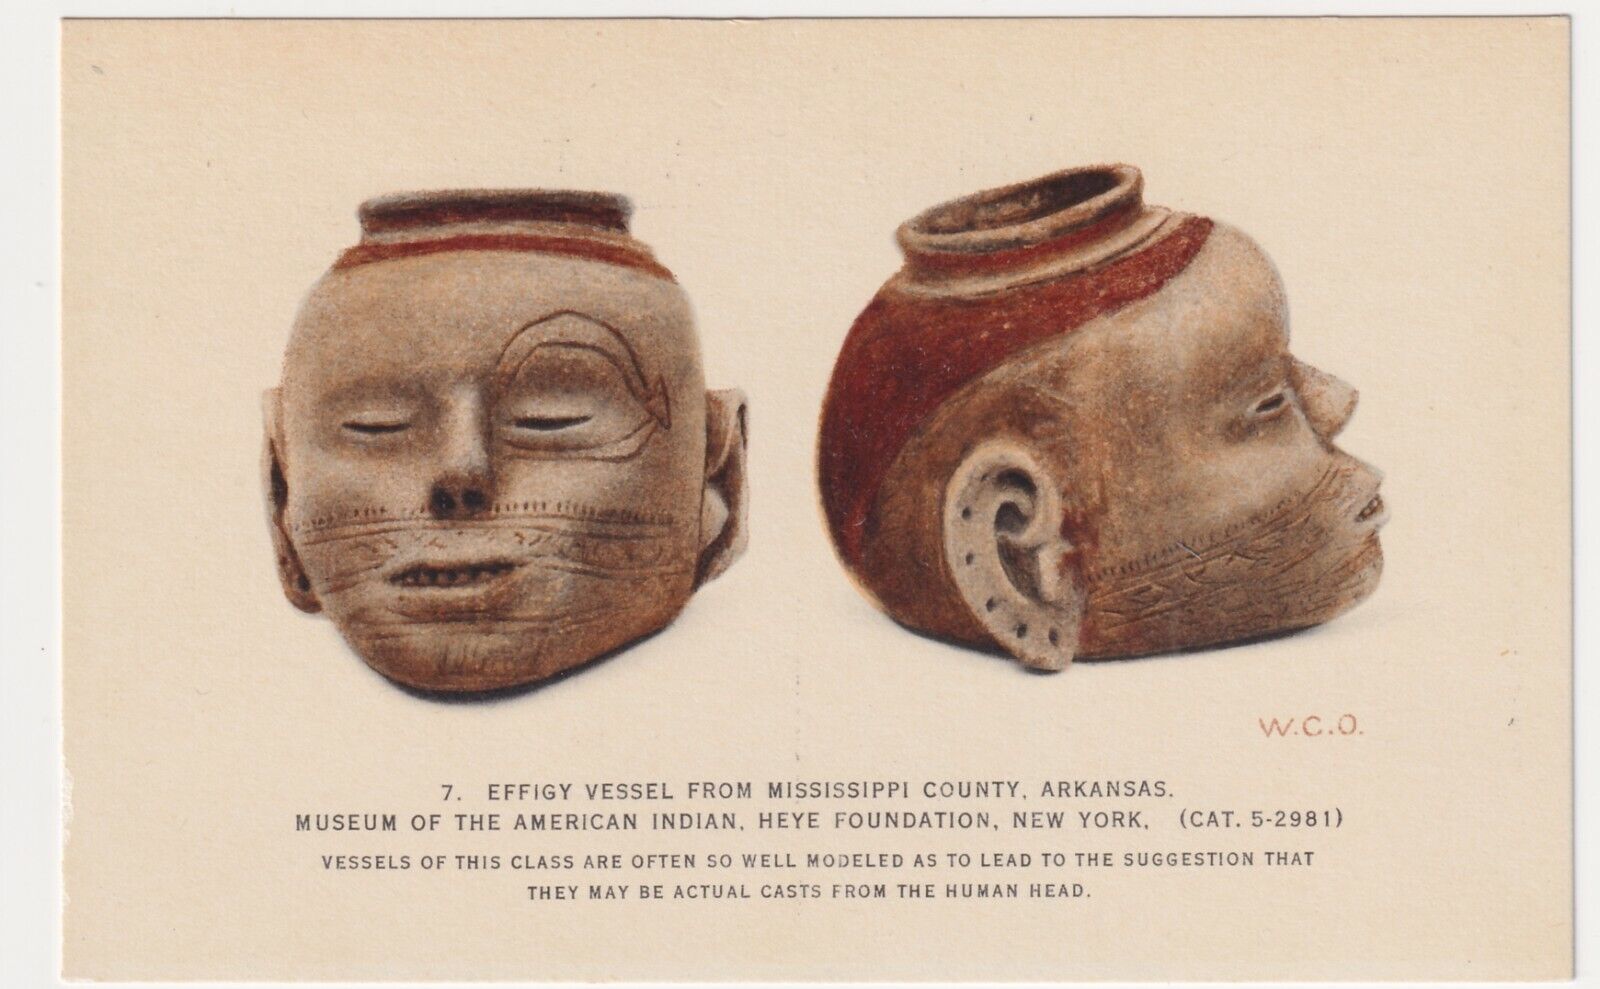 MUSEUM OF THE AMERICAN INDIAN EFFIGY VESSEL, MISSISSIPPI CO ARKANSAS CIRCA 1955.